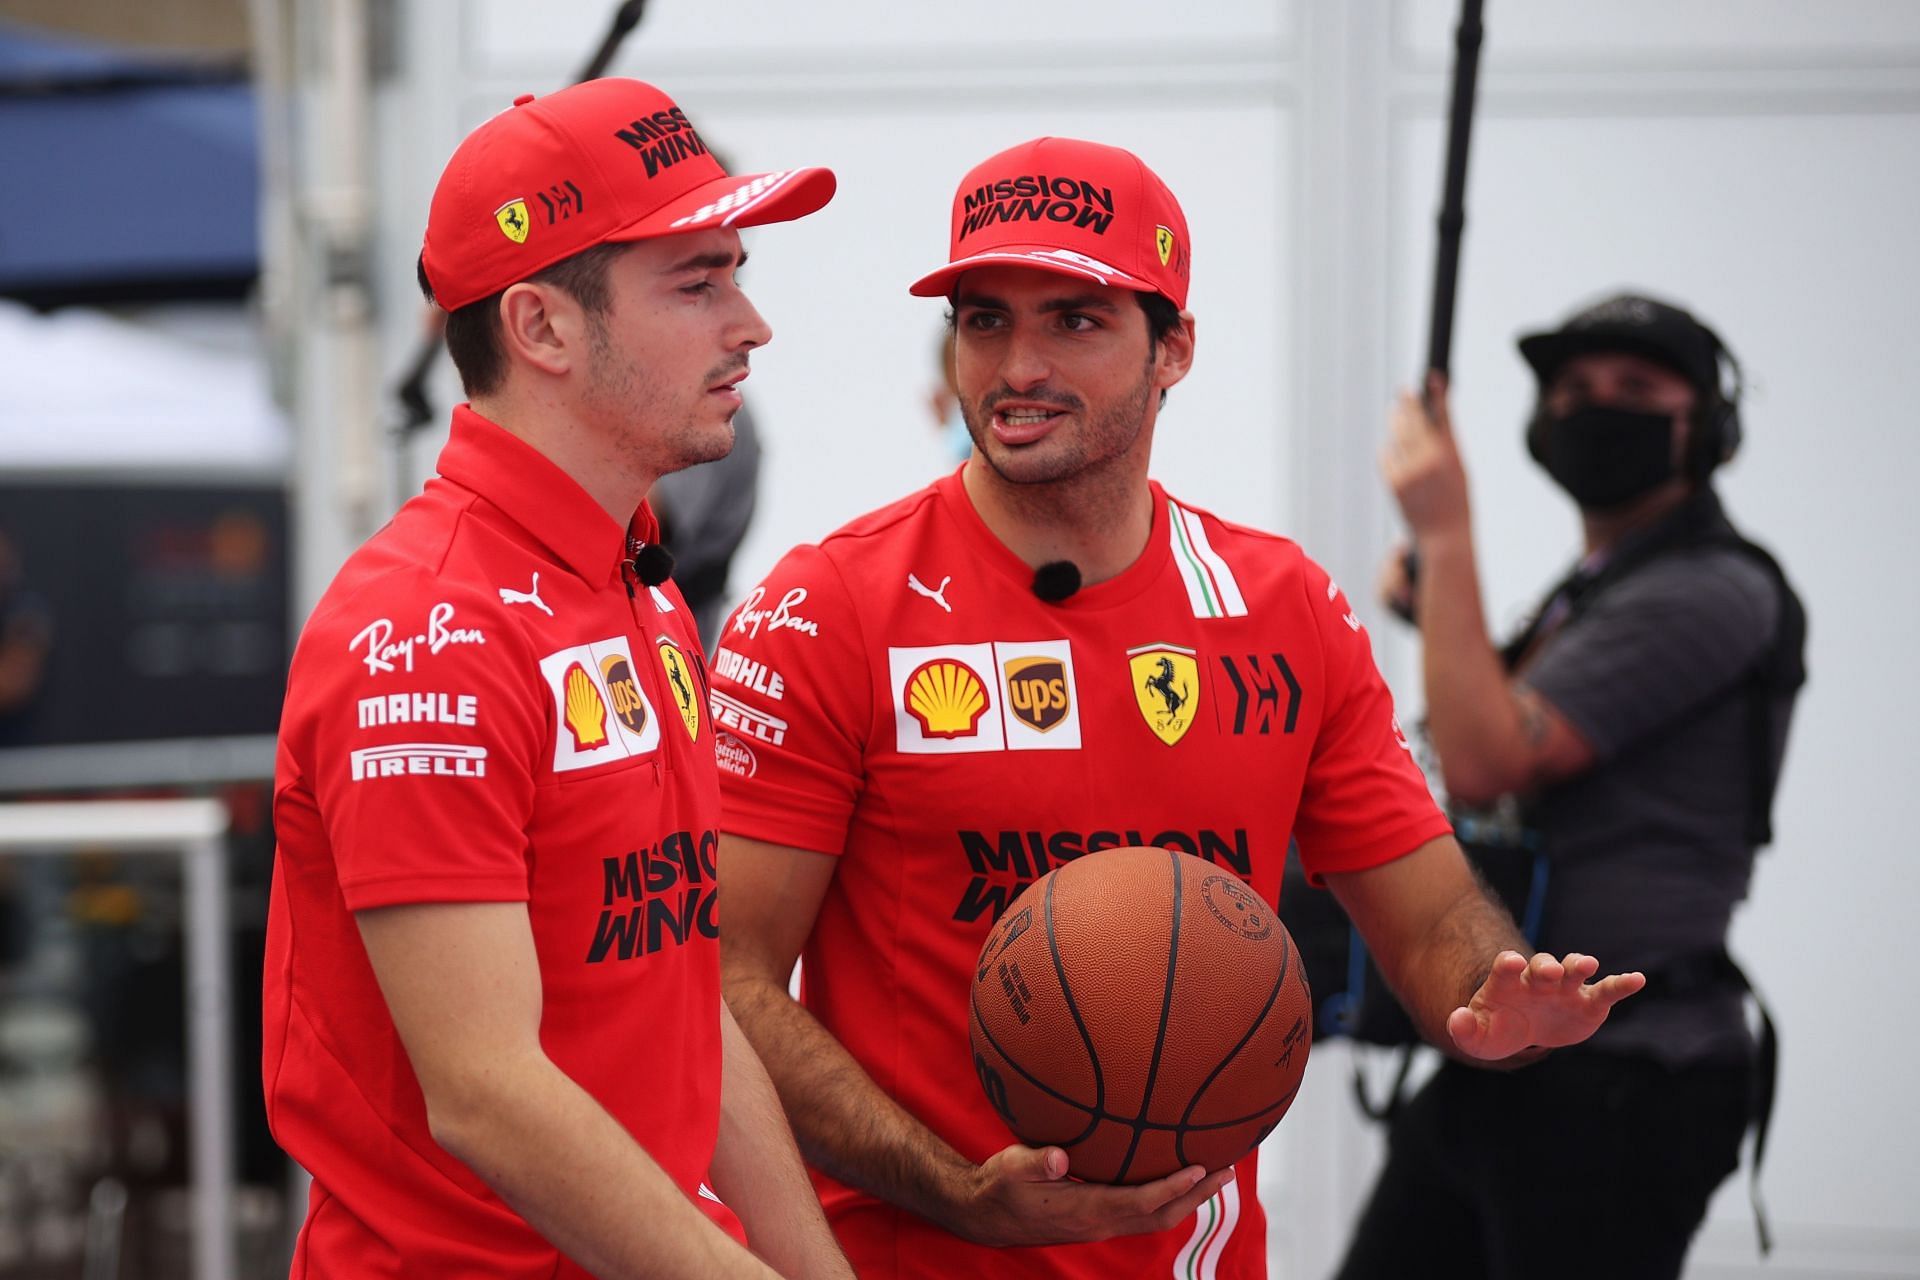 Leclerc and Sainz had a great first season together at Ferrari.